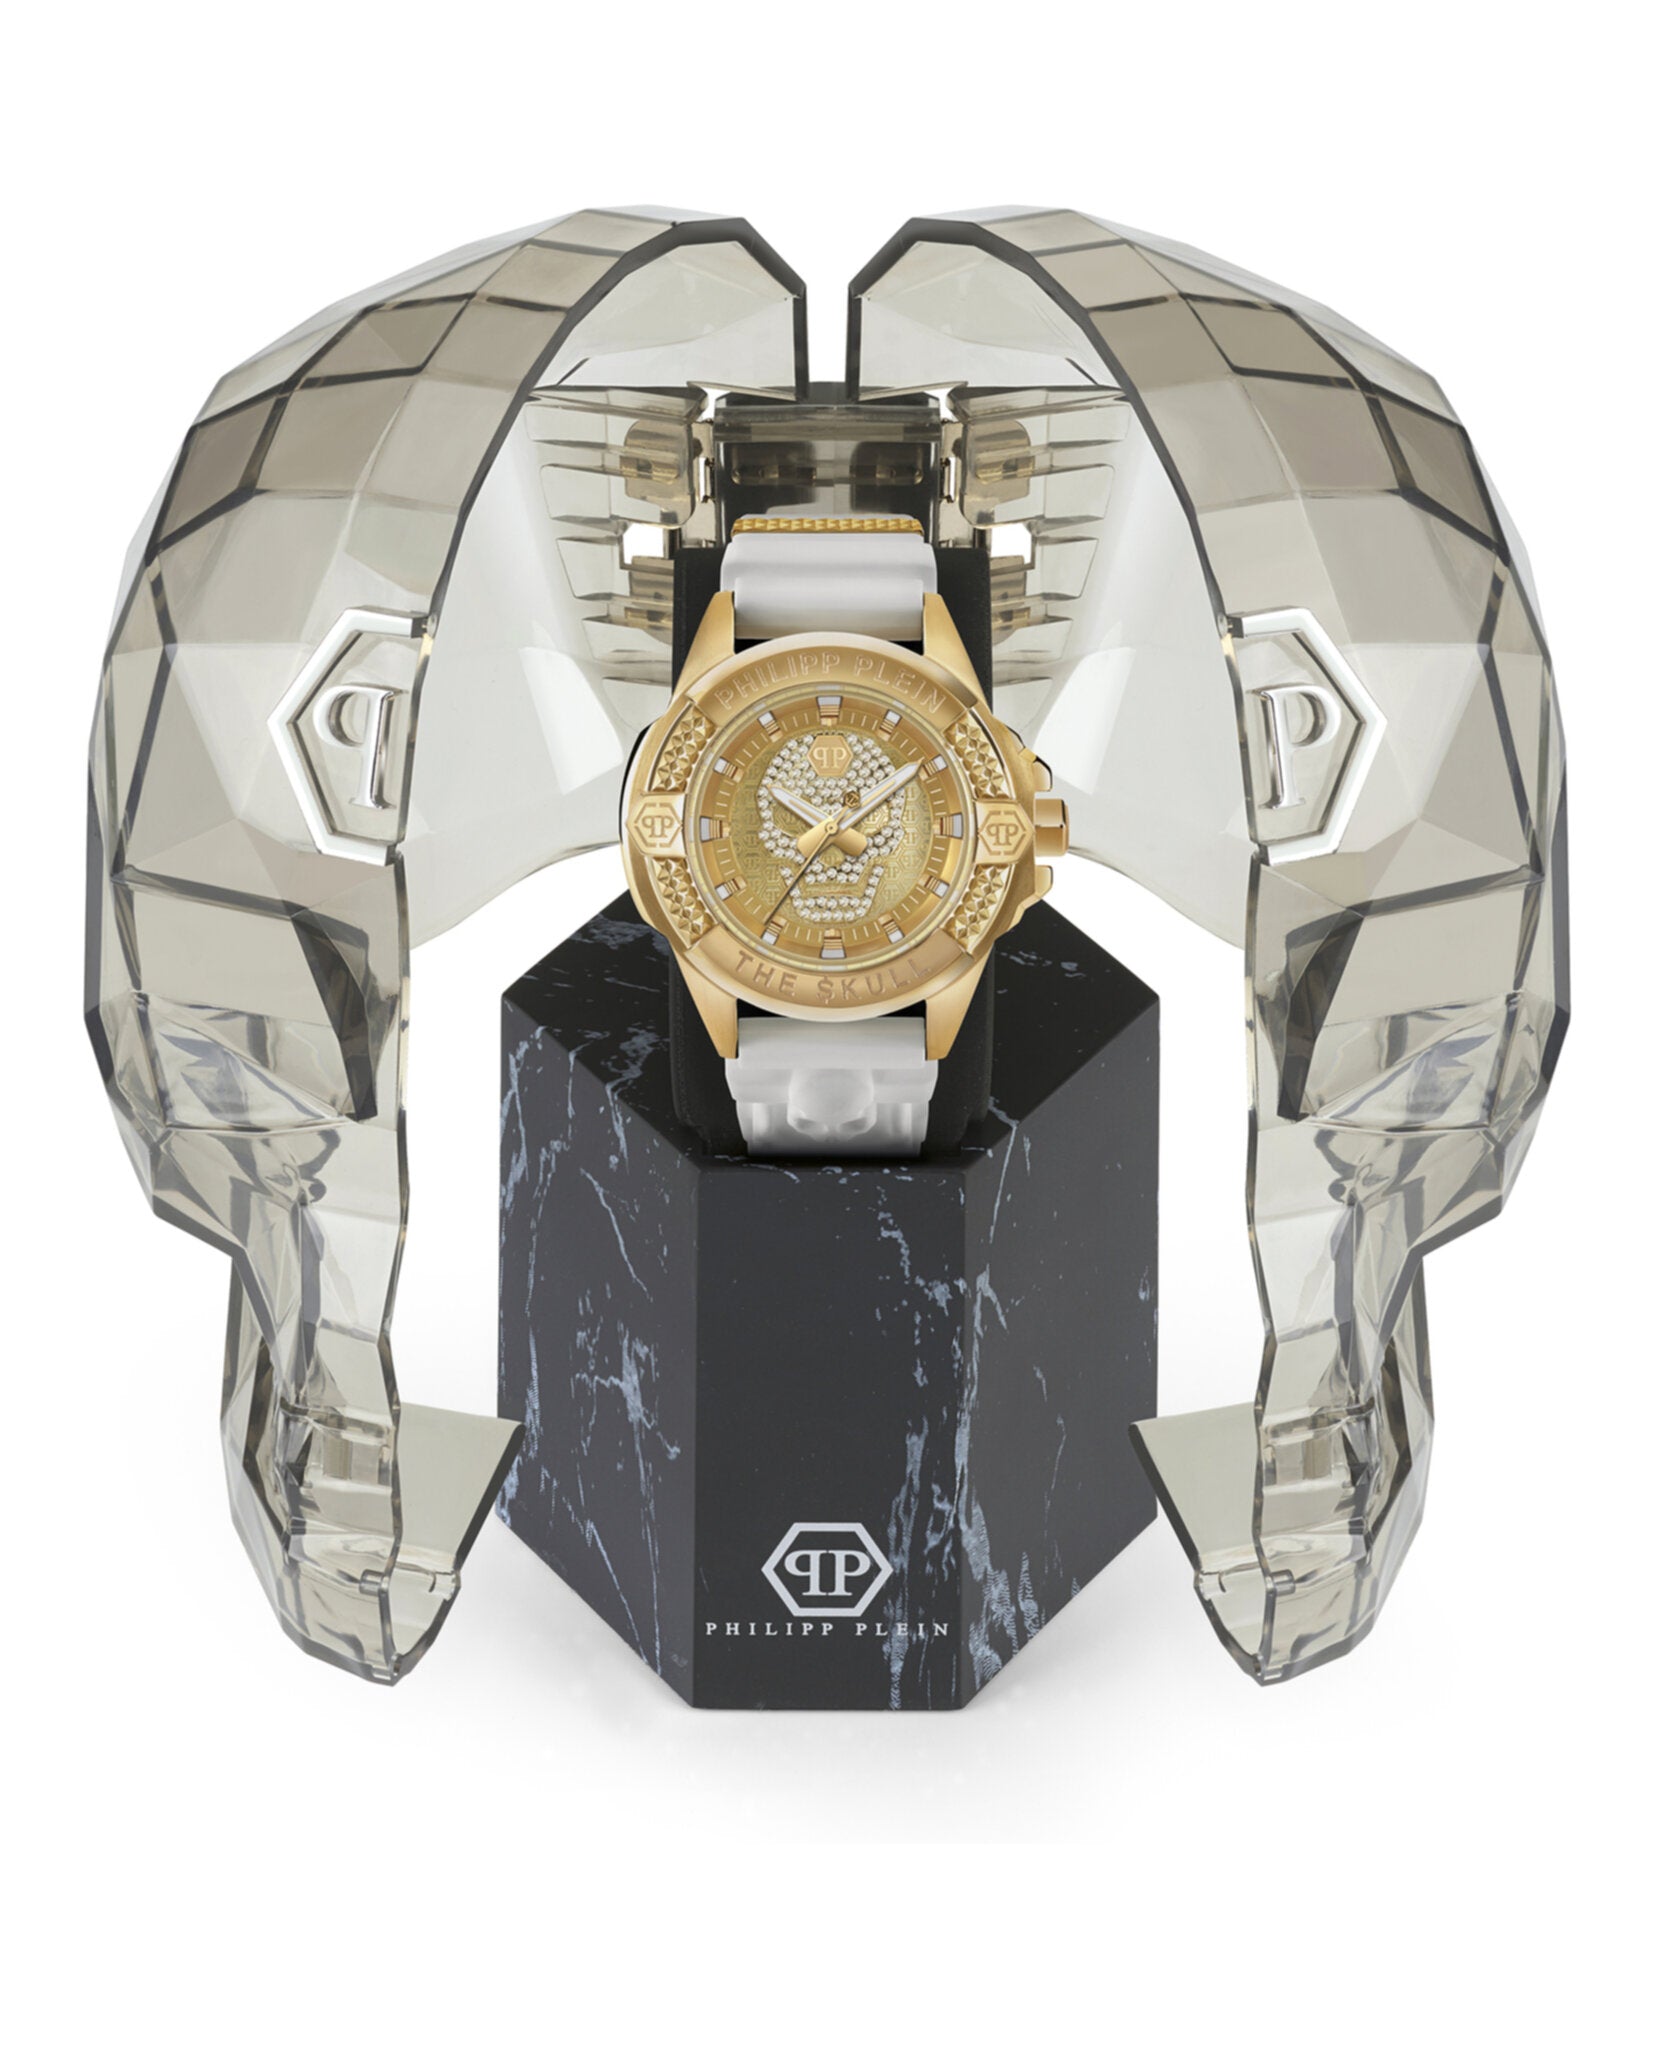 The $kull Crystal Watch